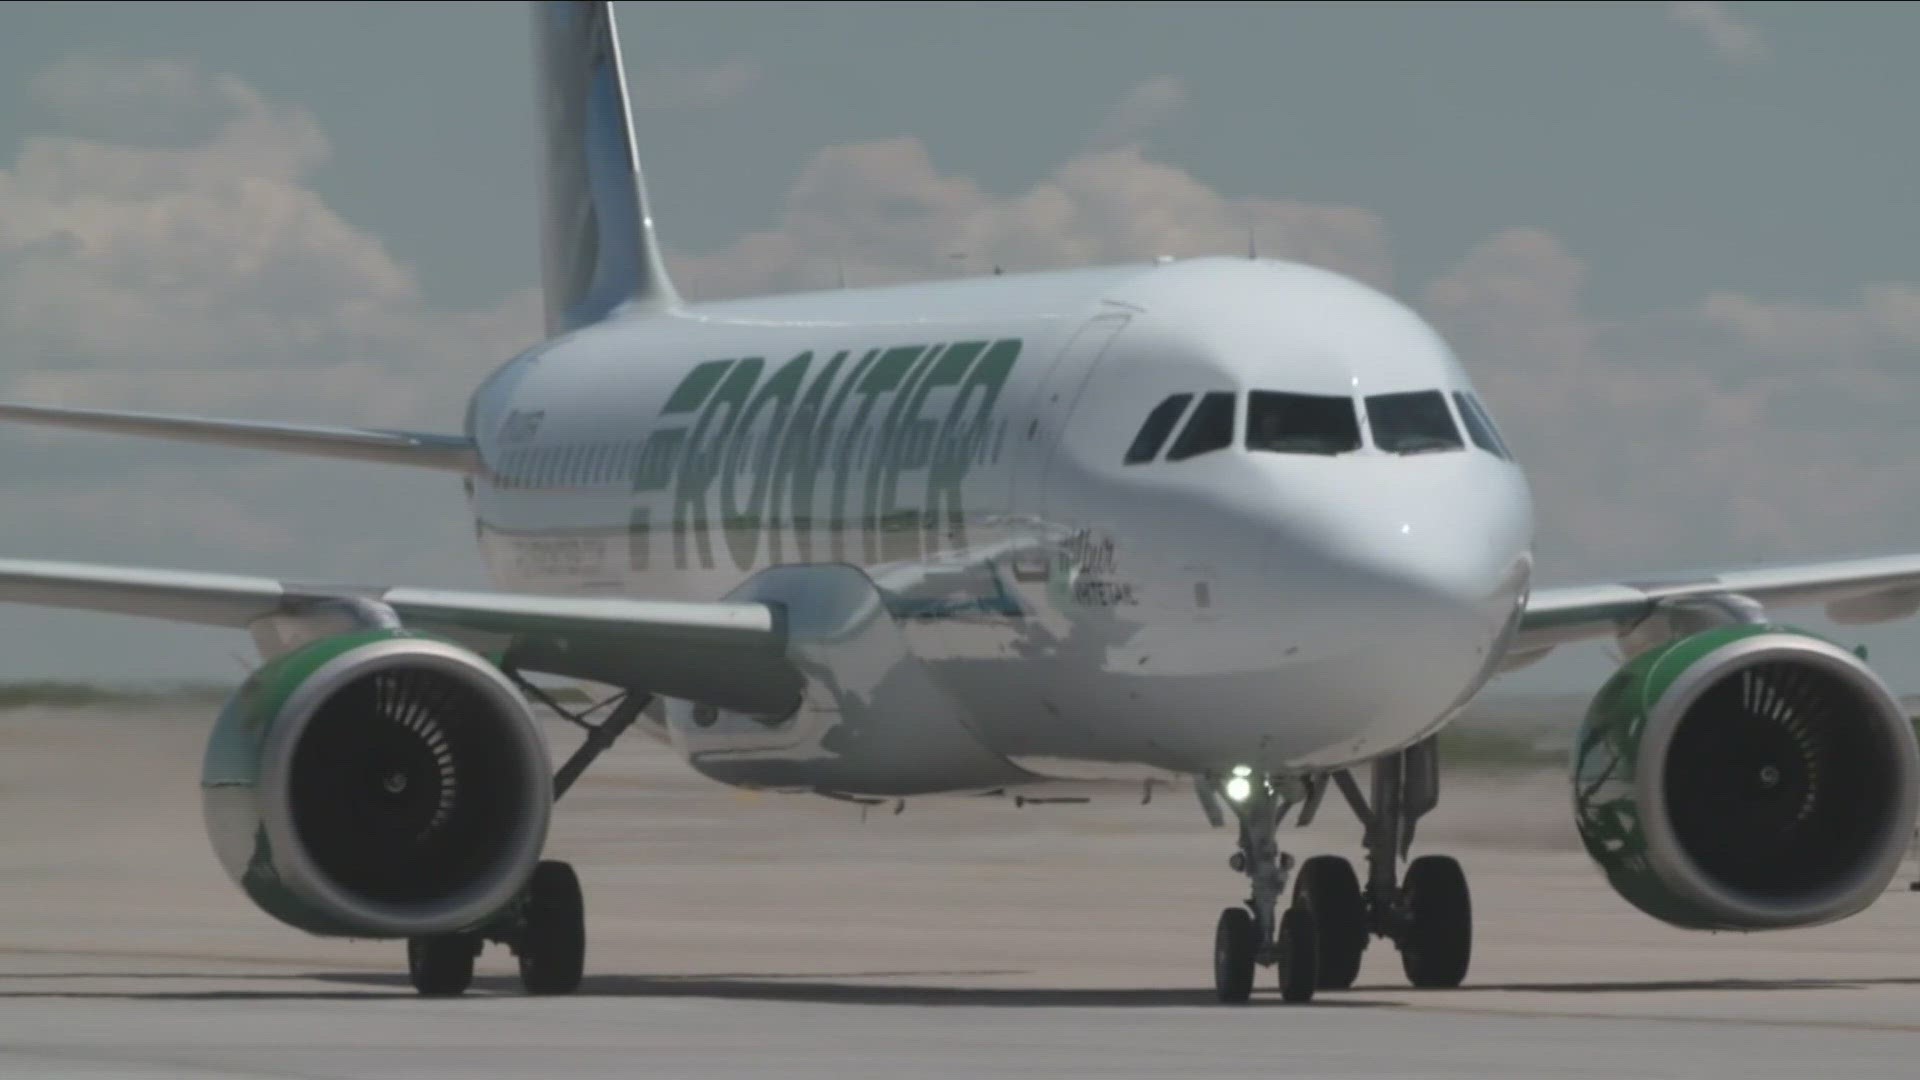 Frontier airlines adds Charlotte flight from Buffalo starting in May, running 3x a week